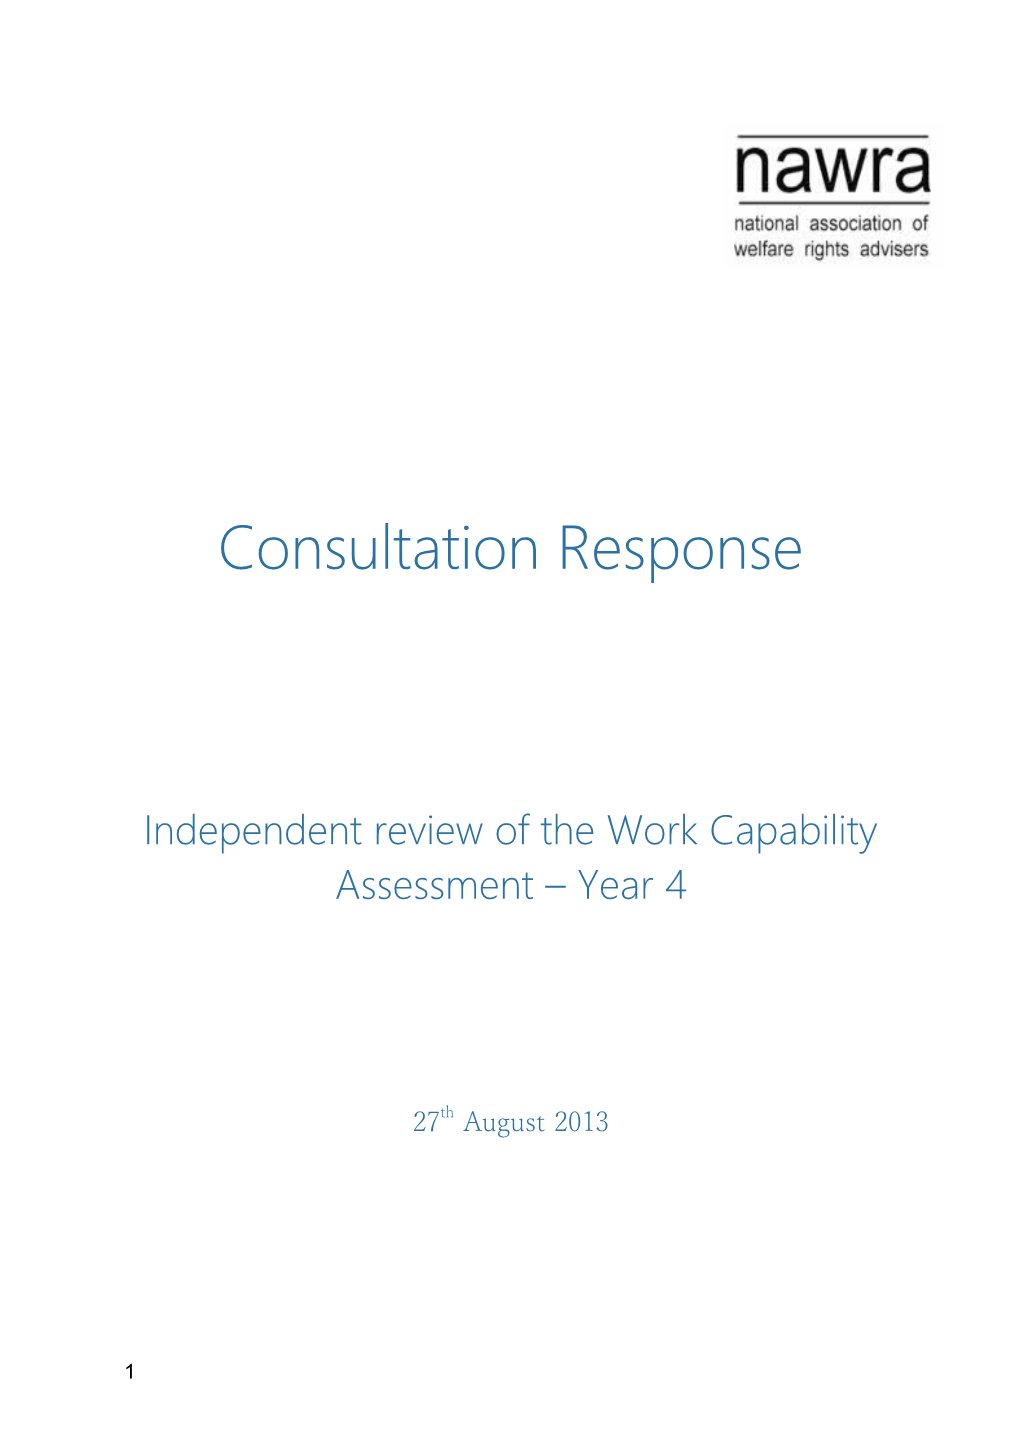 Independent Review of the Work Capability Assessment Year 4